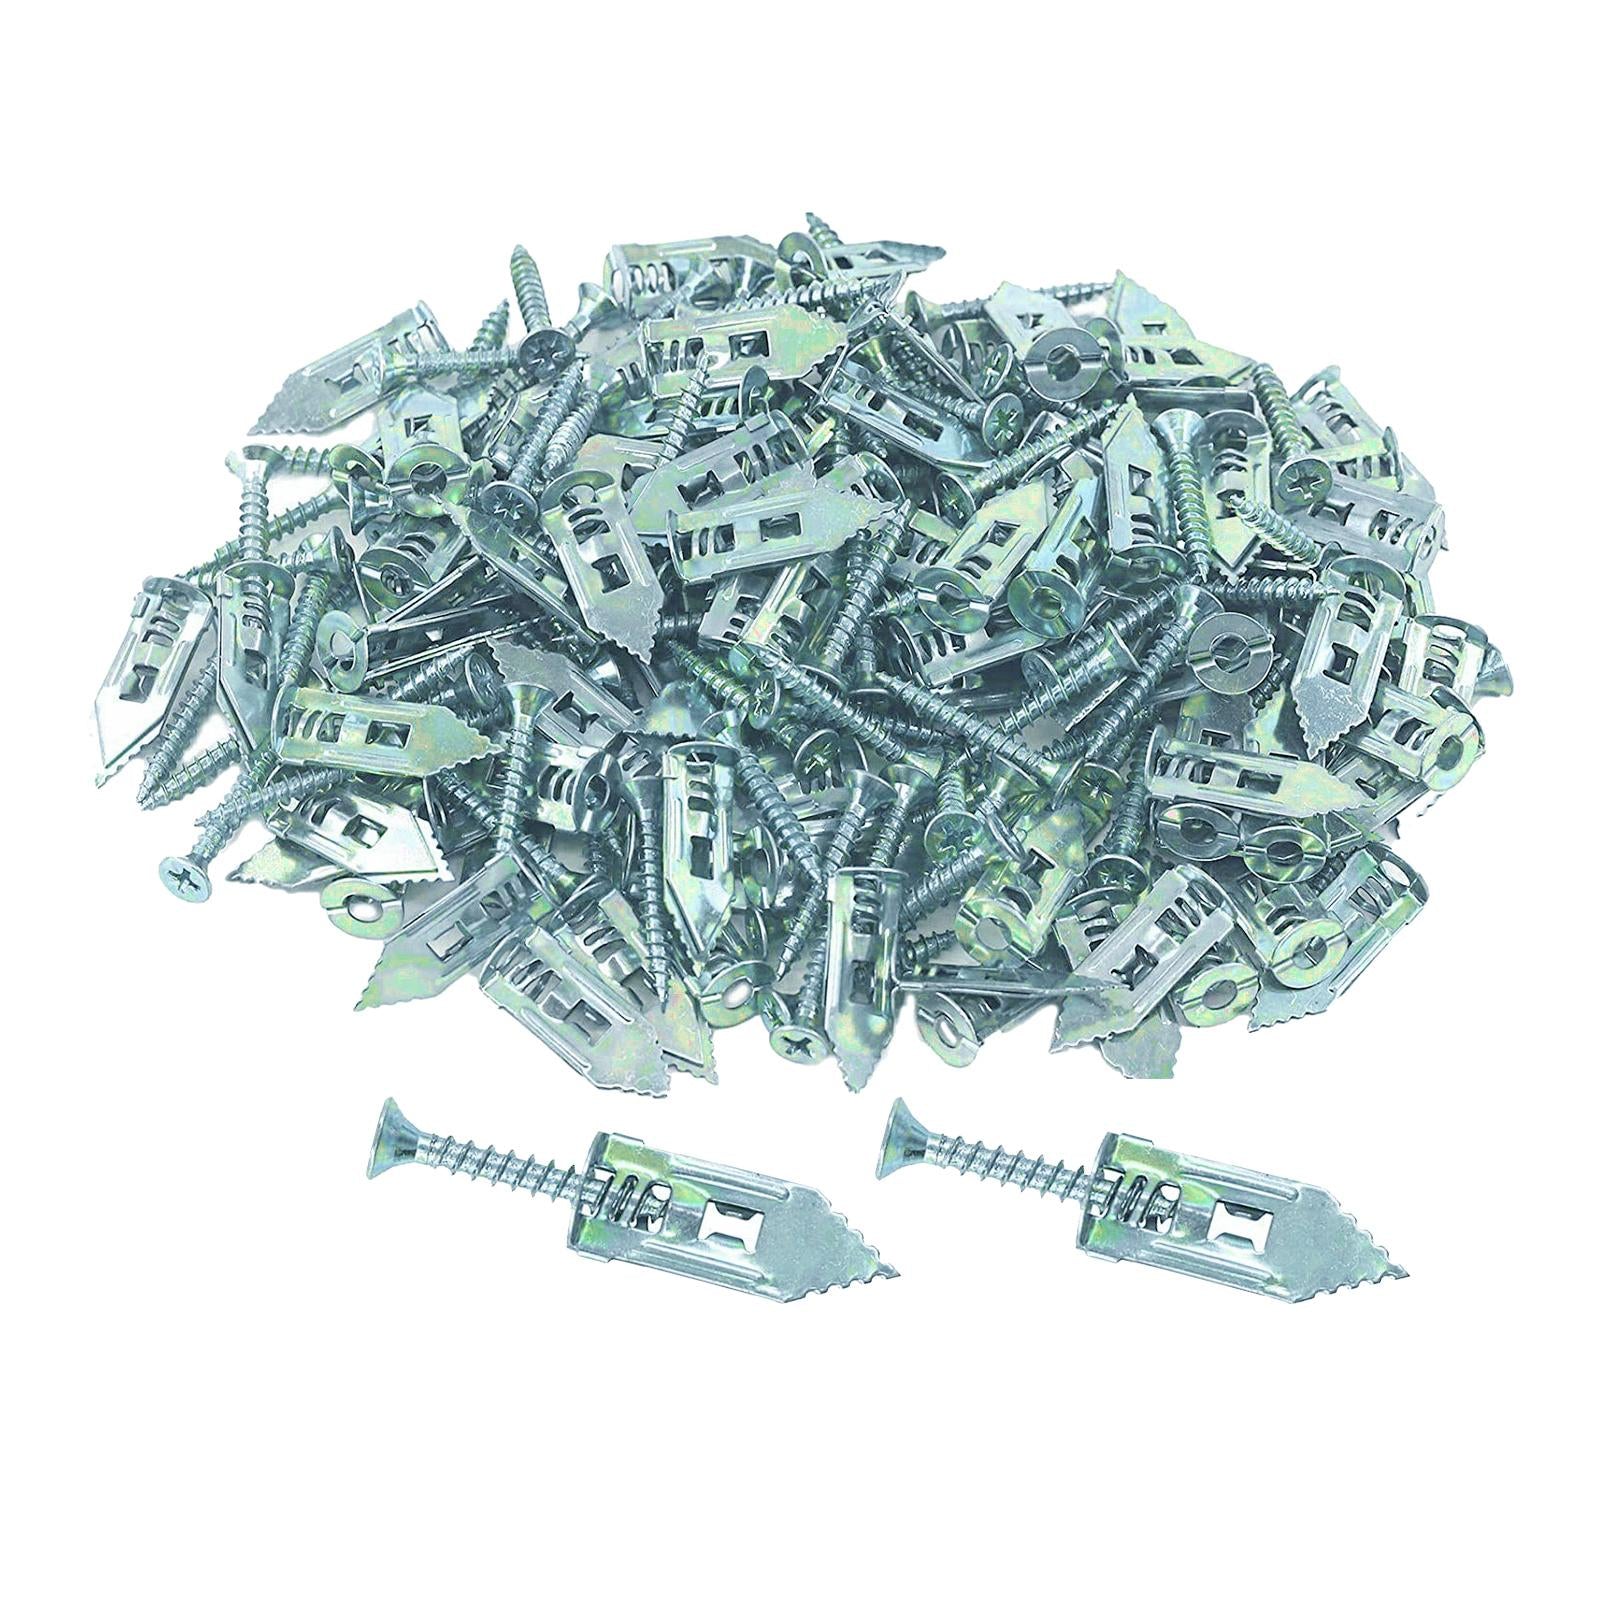 100x Drywall Self Drilling Anchors Screws Kit Easy Application for TV Bike 12x40mm Silver